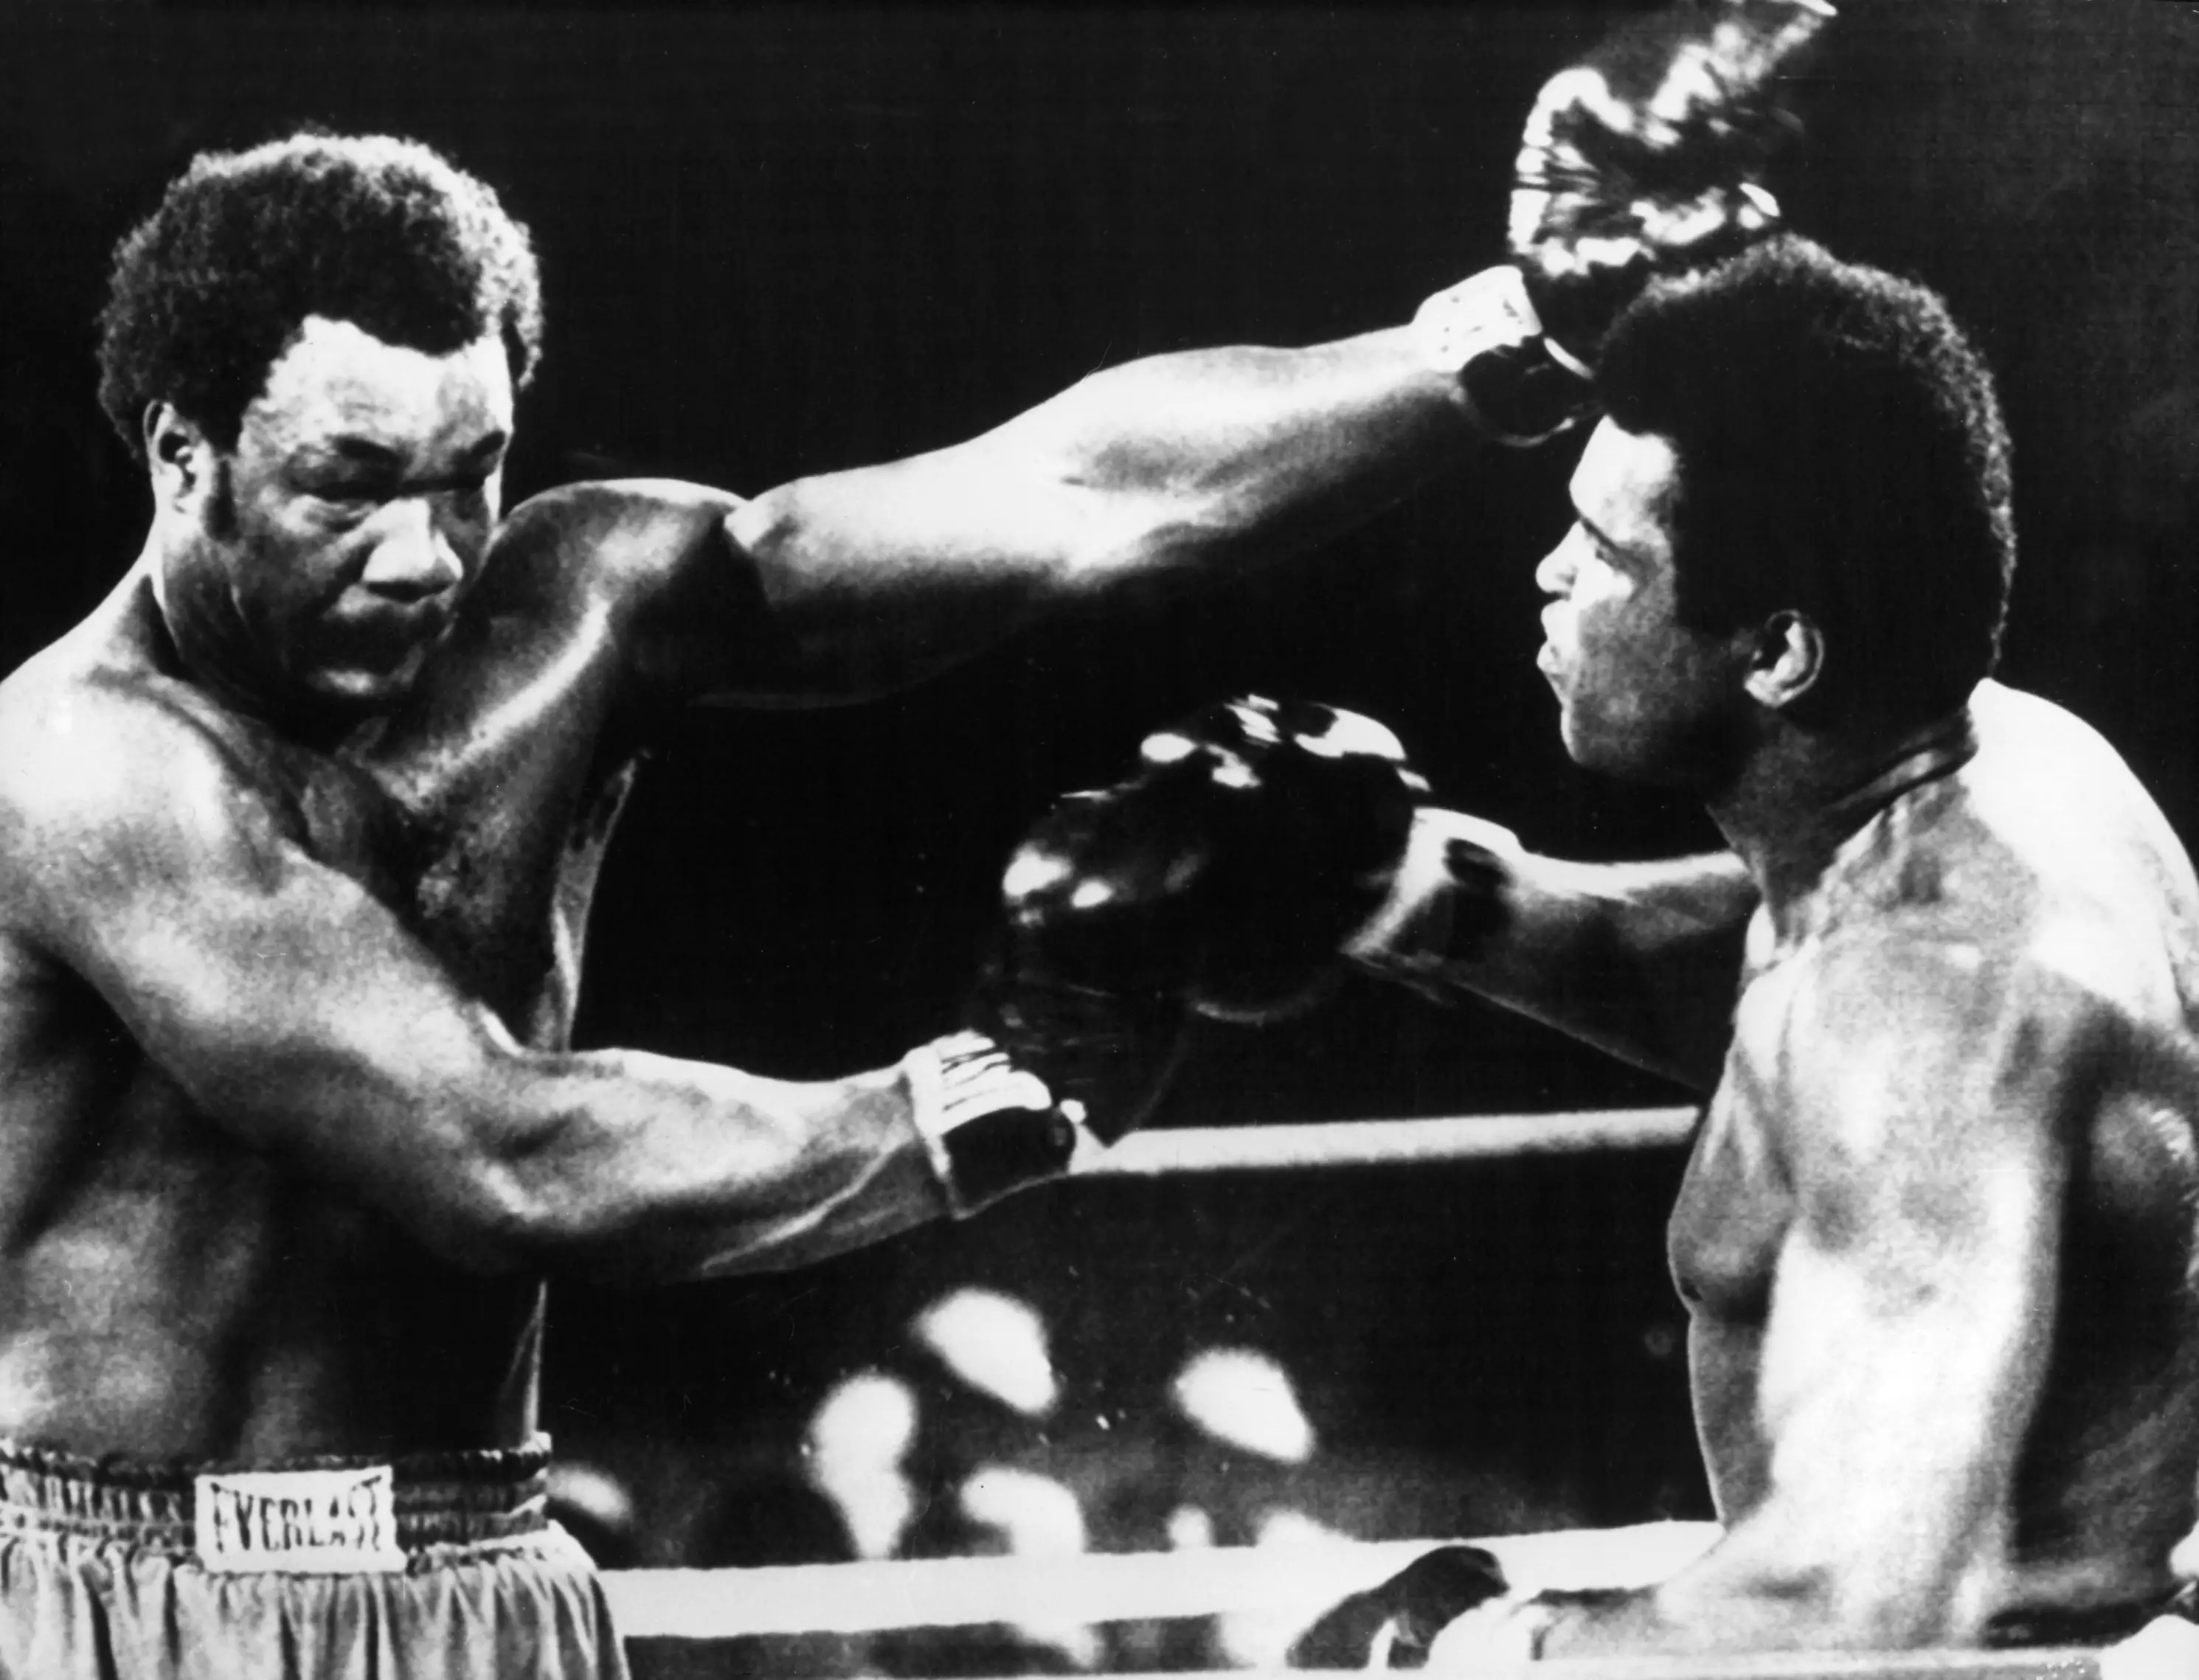 Foreman (L) taking on Muhammad Ali (R) at 'The Rumble in the Jungle' in 1974. (Image